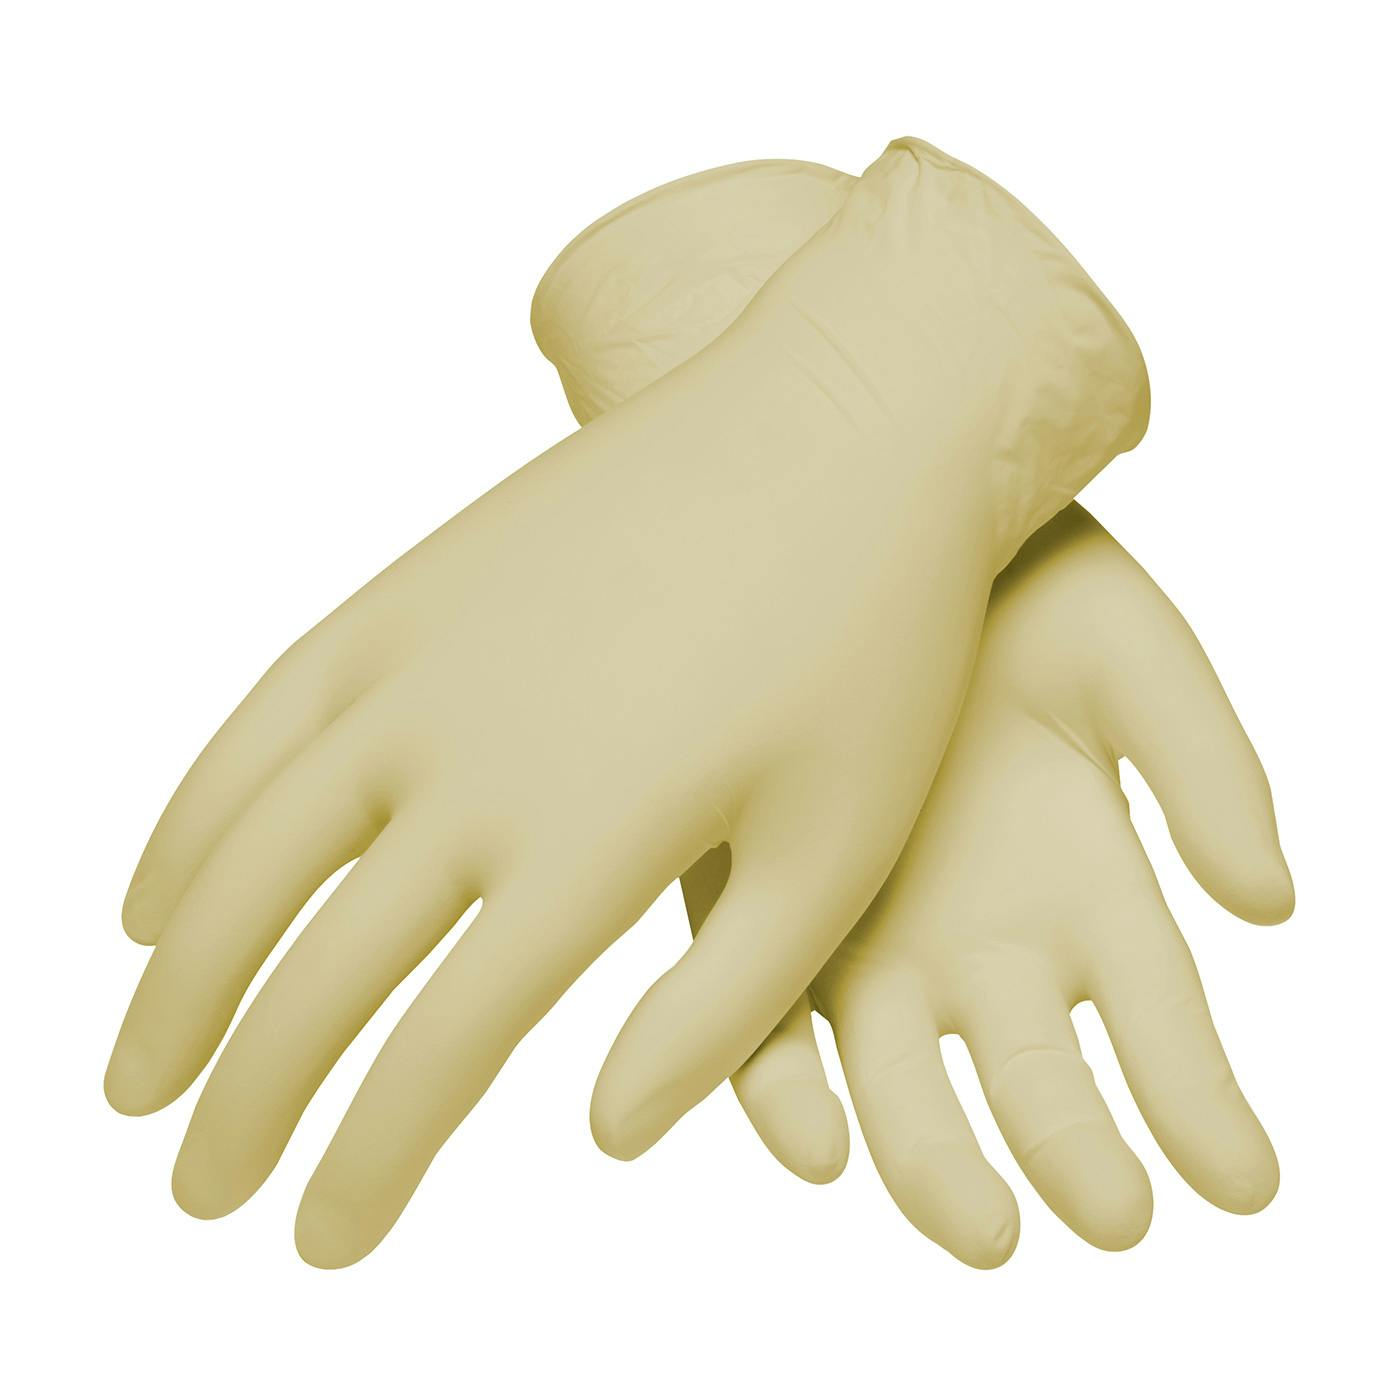 CleanTeam® Single Use Class 100 Cleanroom Latex Glove with Fully Textured Grip - 9.5" (100-322400)_0